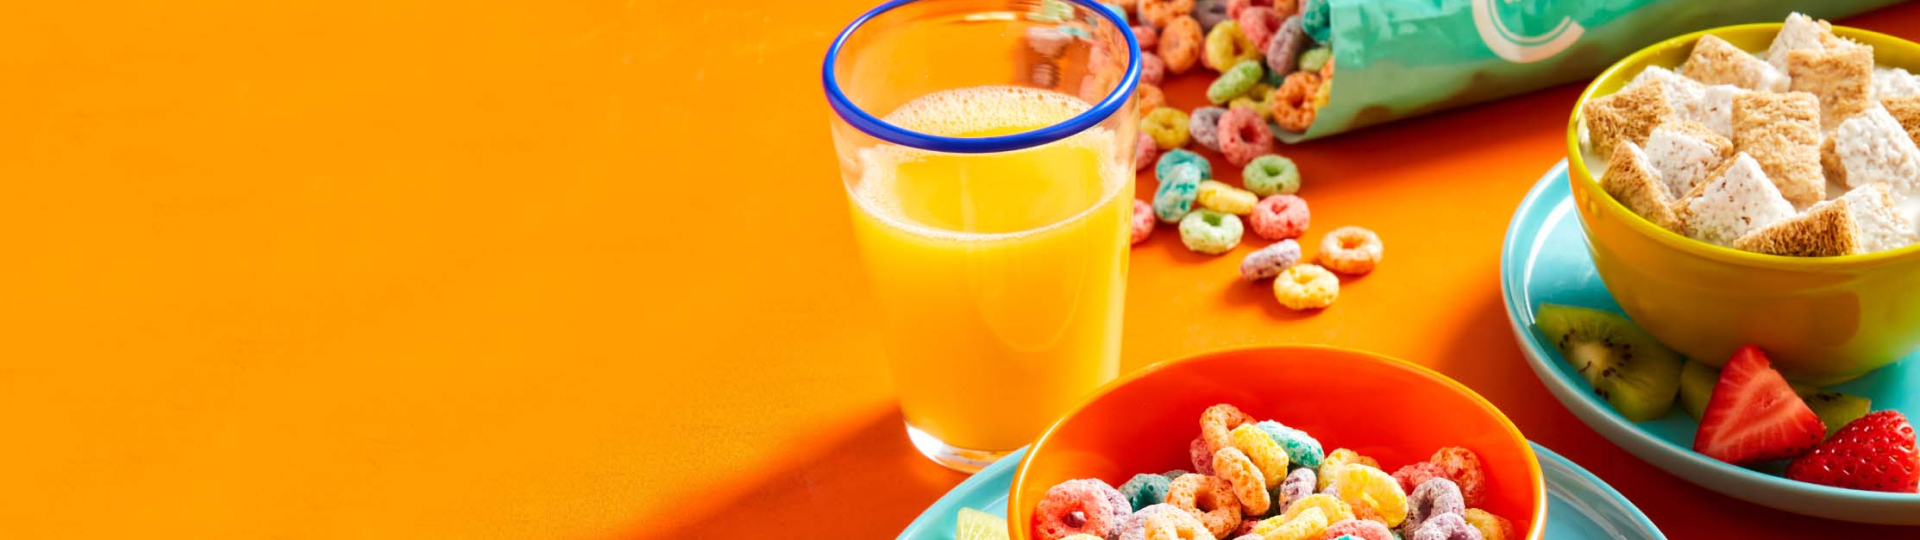 orange background with open bag of Compliments fruity hoops cereal, two bowls of cereal with milk, and a glass of orange juice